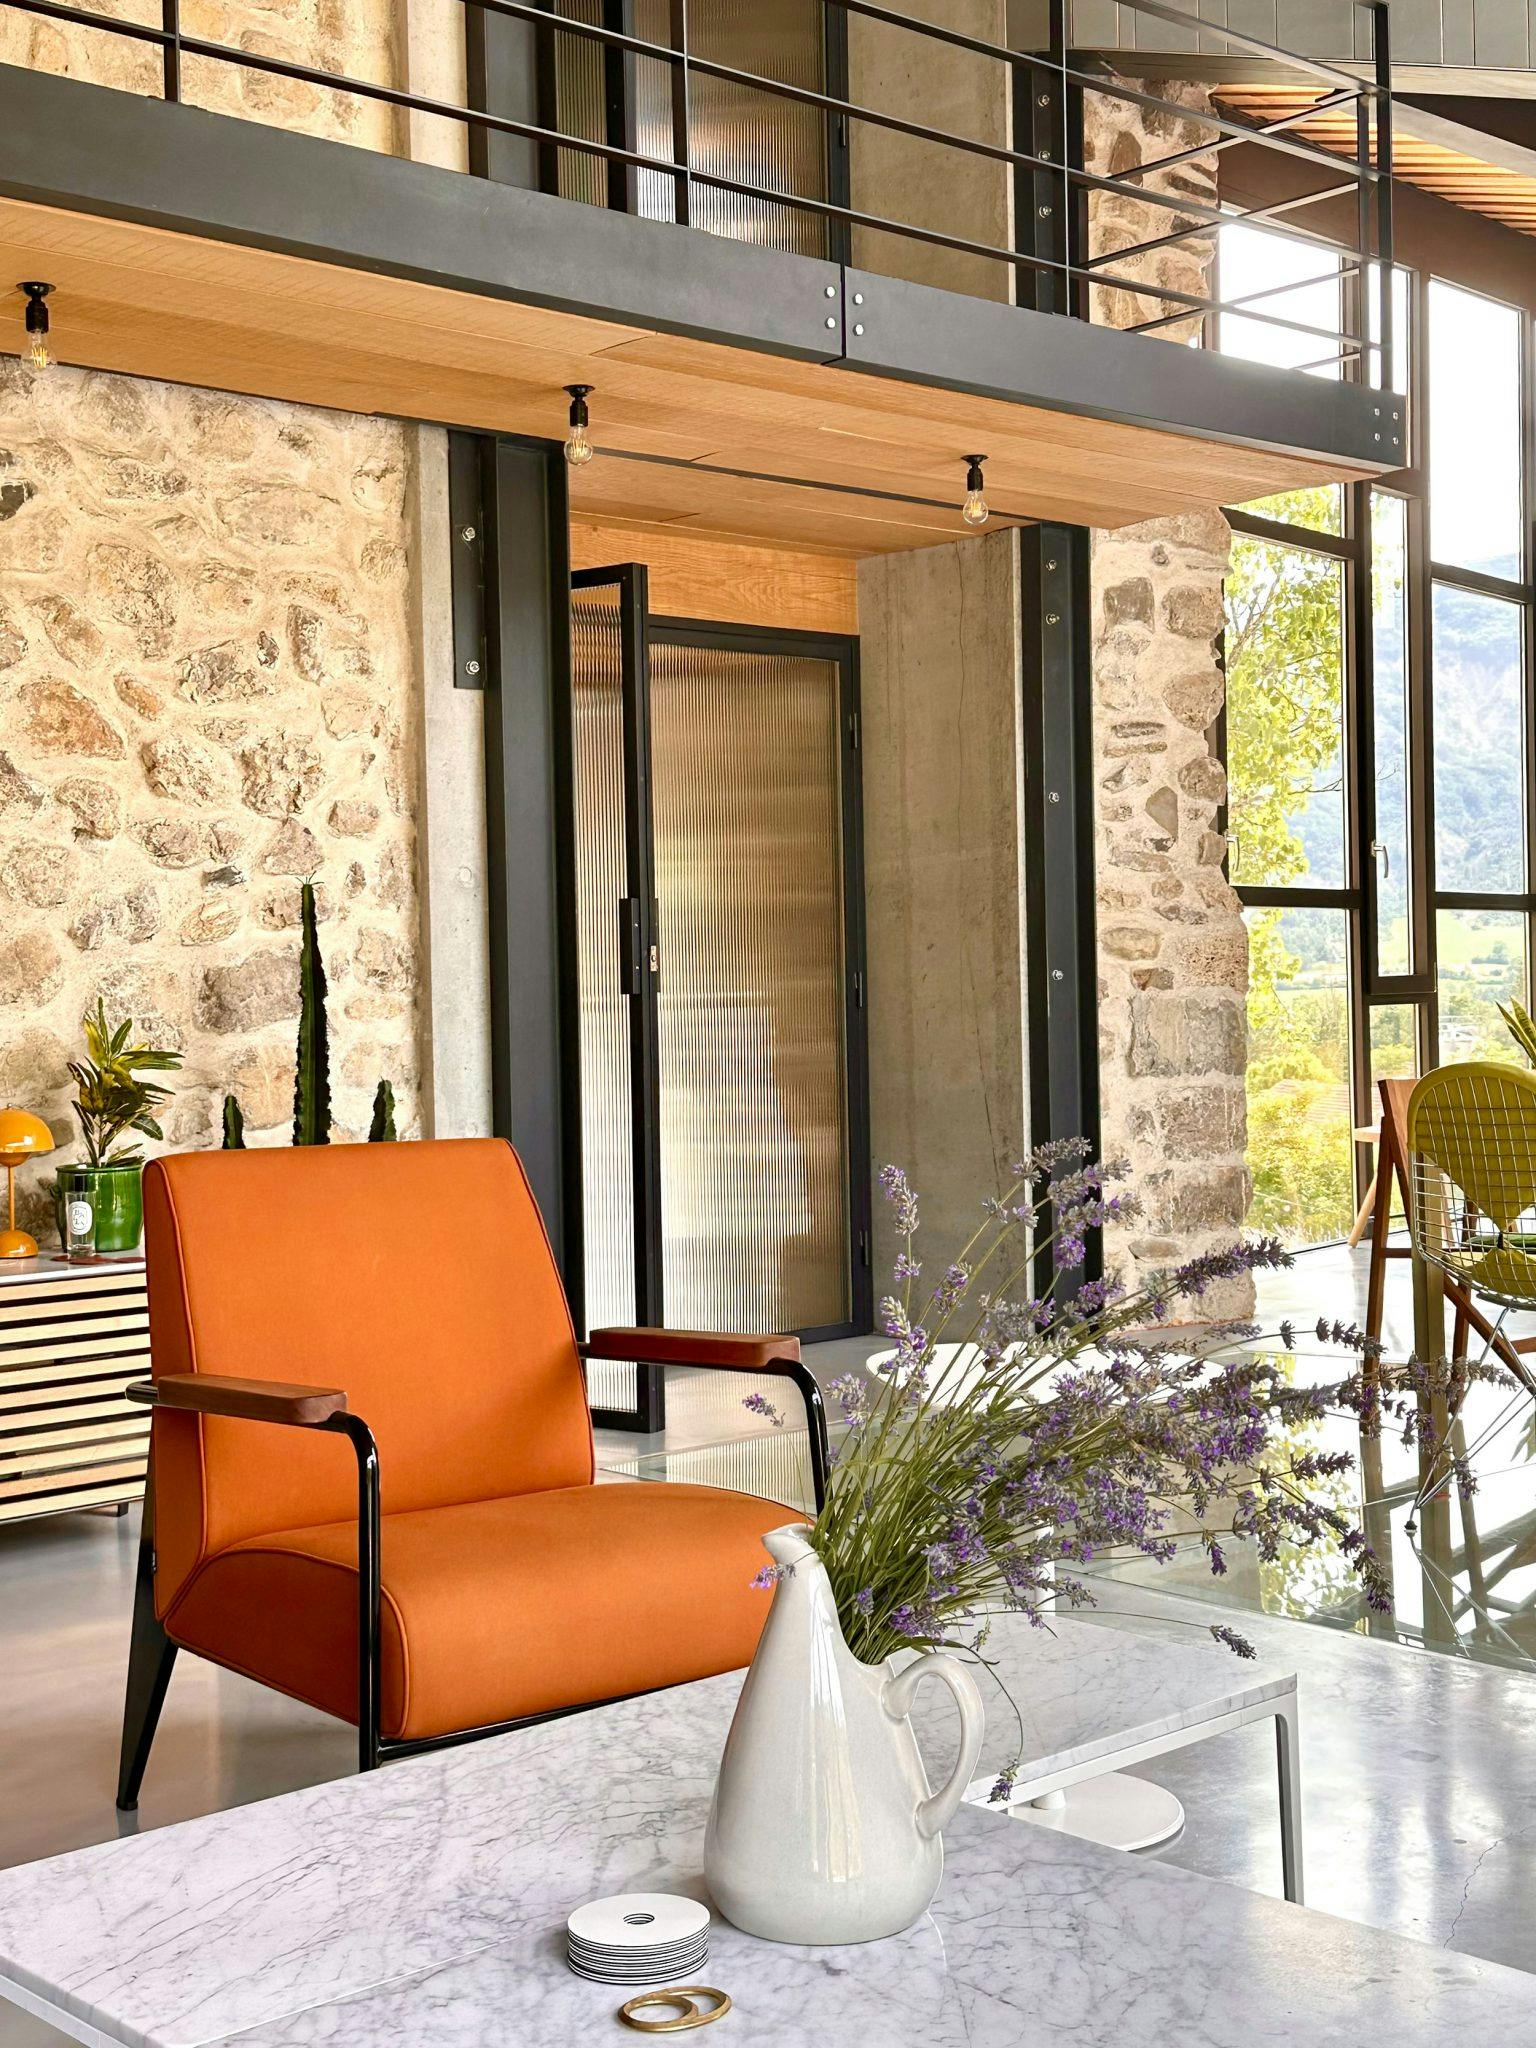 Design furniture and traditional stone walls.